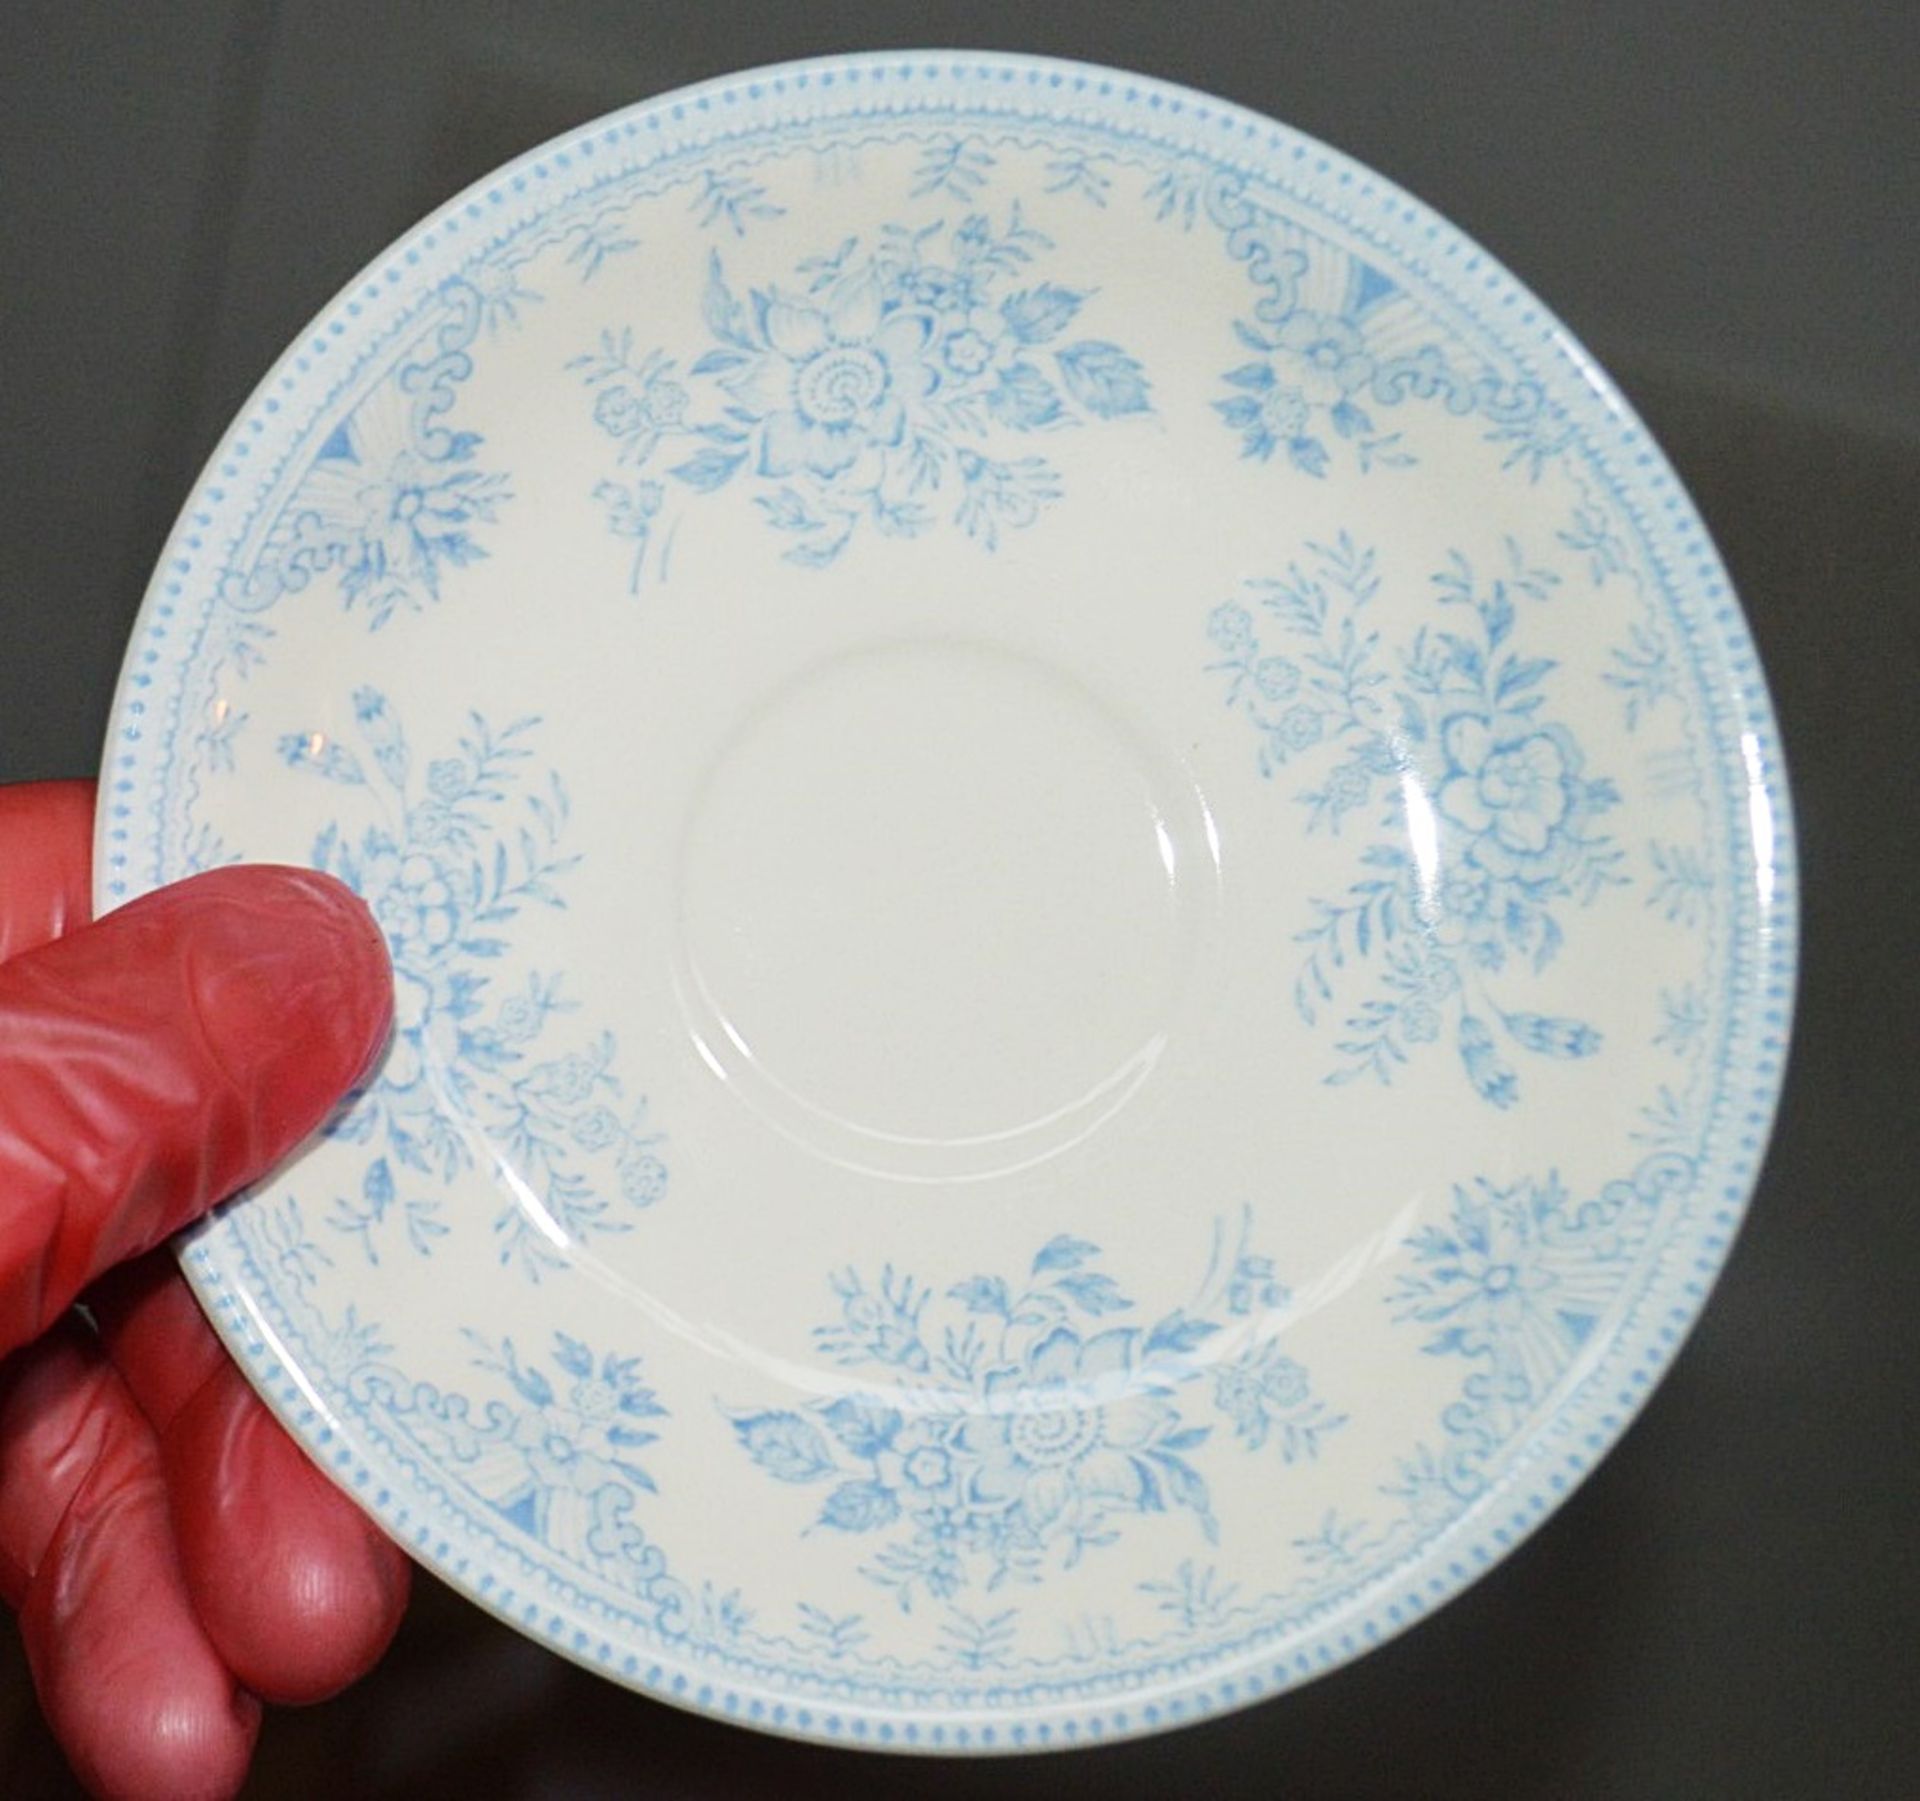 12 x BURLEIGH 'Blue Asiatic Pheasants' Handmade Teacup-Saucers - Unboxed Stock - Ref: HHW211-212/ - Image 5 of 5